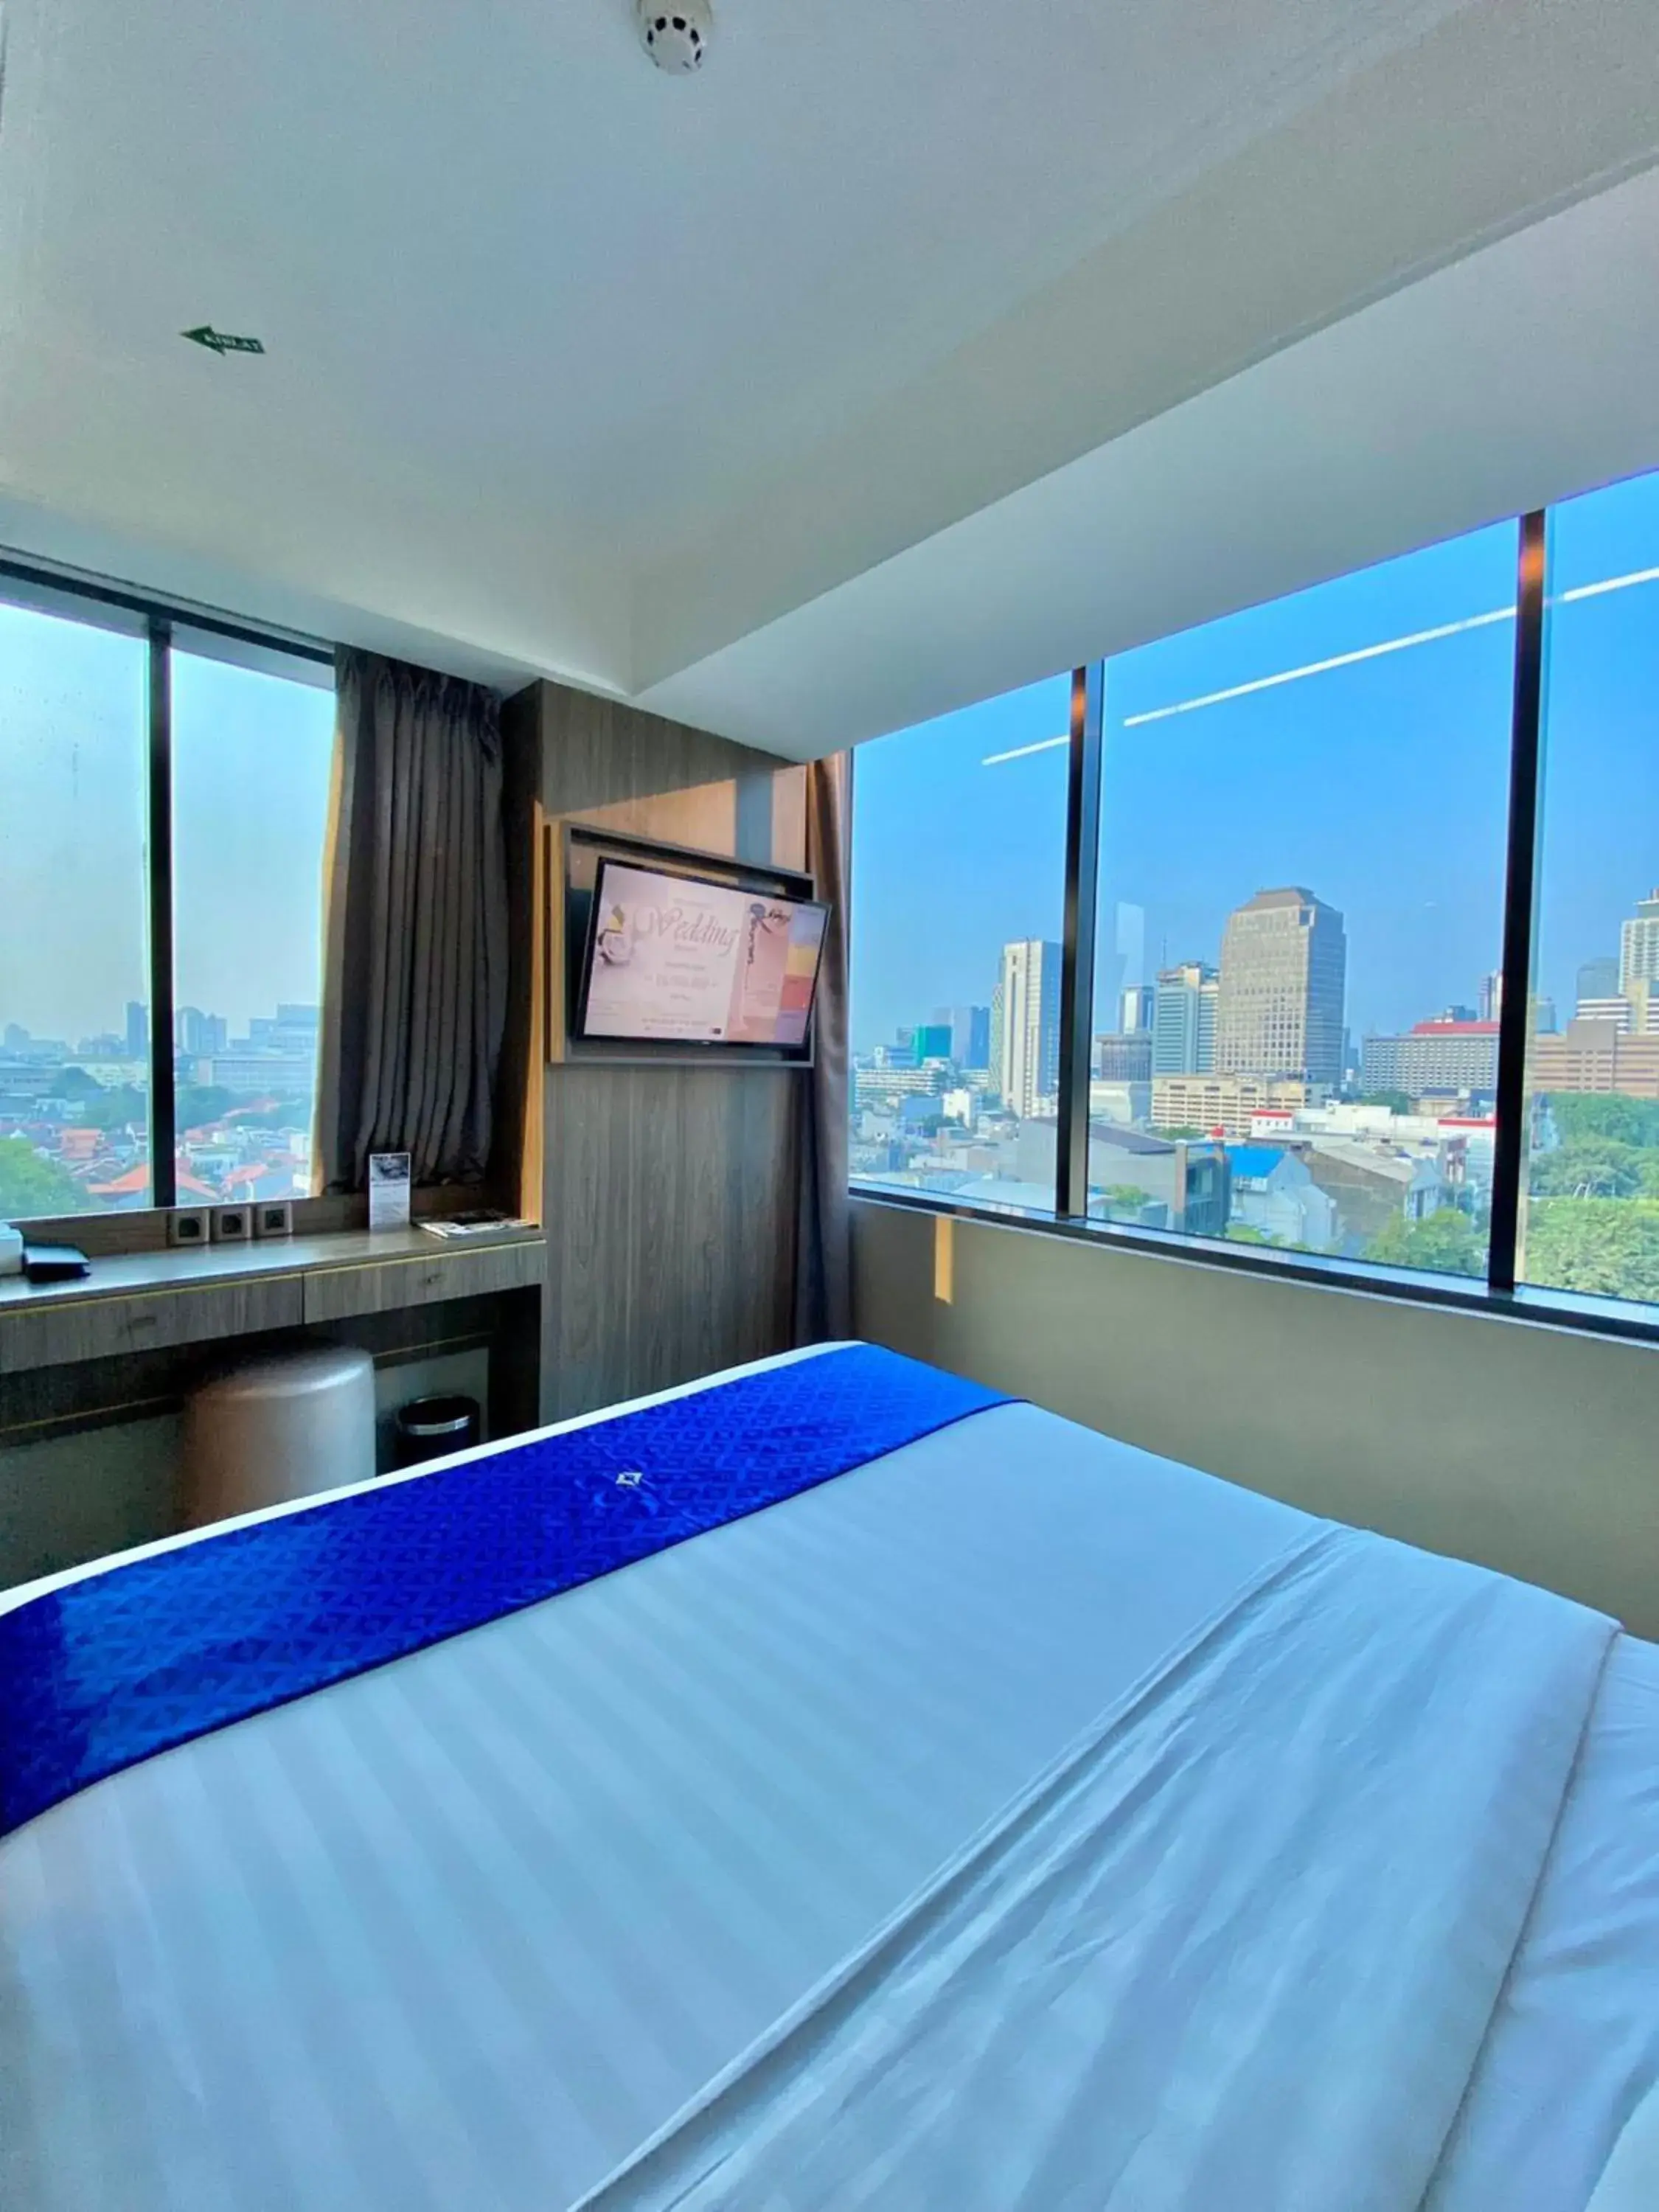 View (from property/room) in Arthama Hotel Wahid Hasyim Jakarta